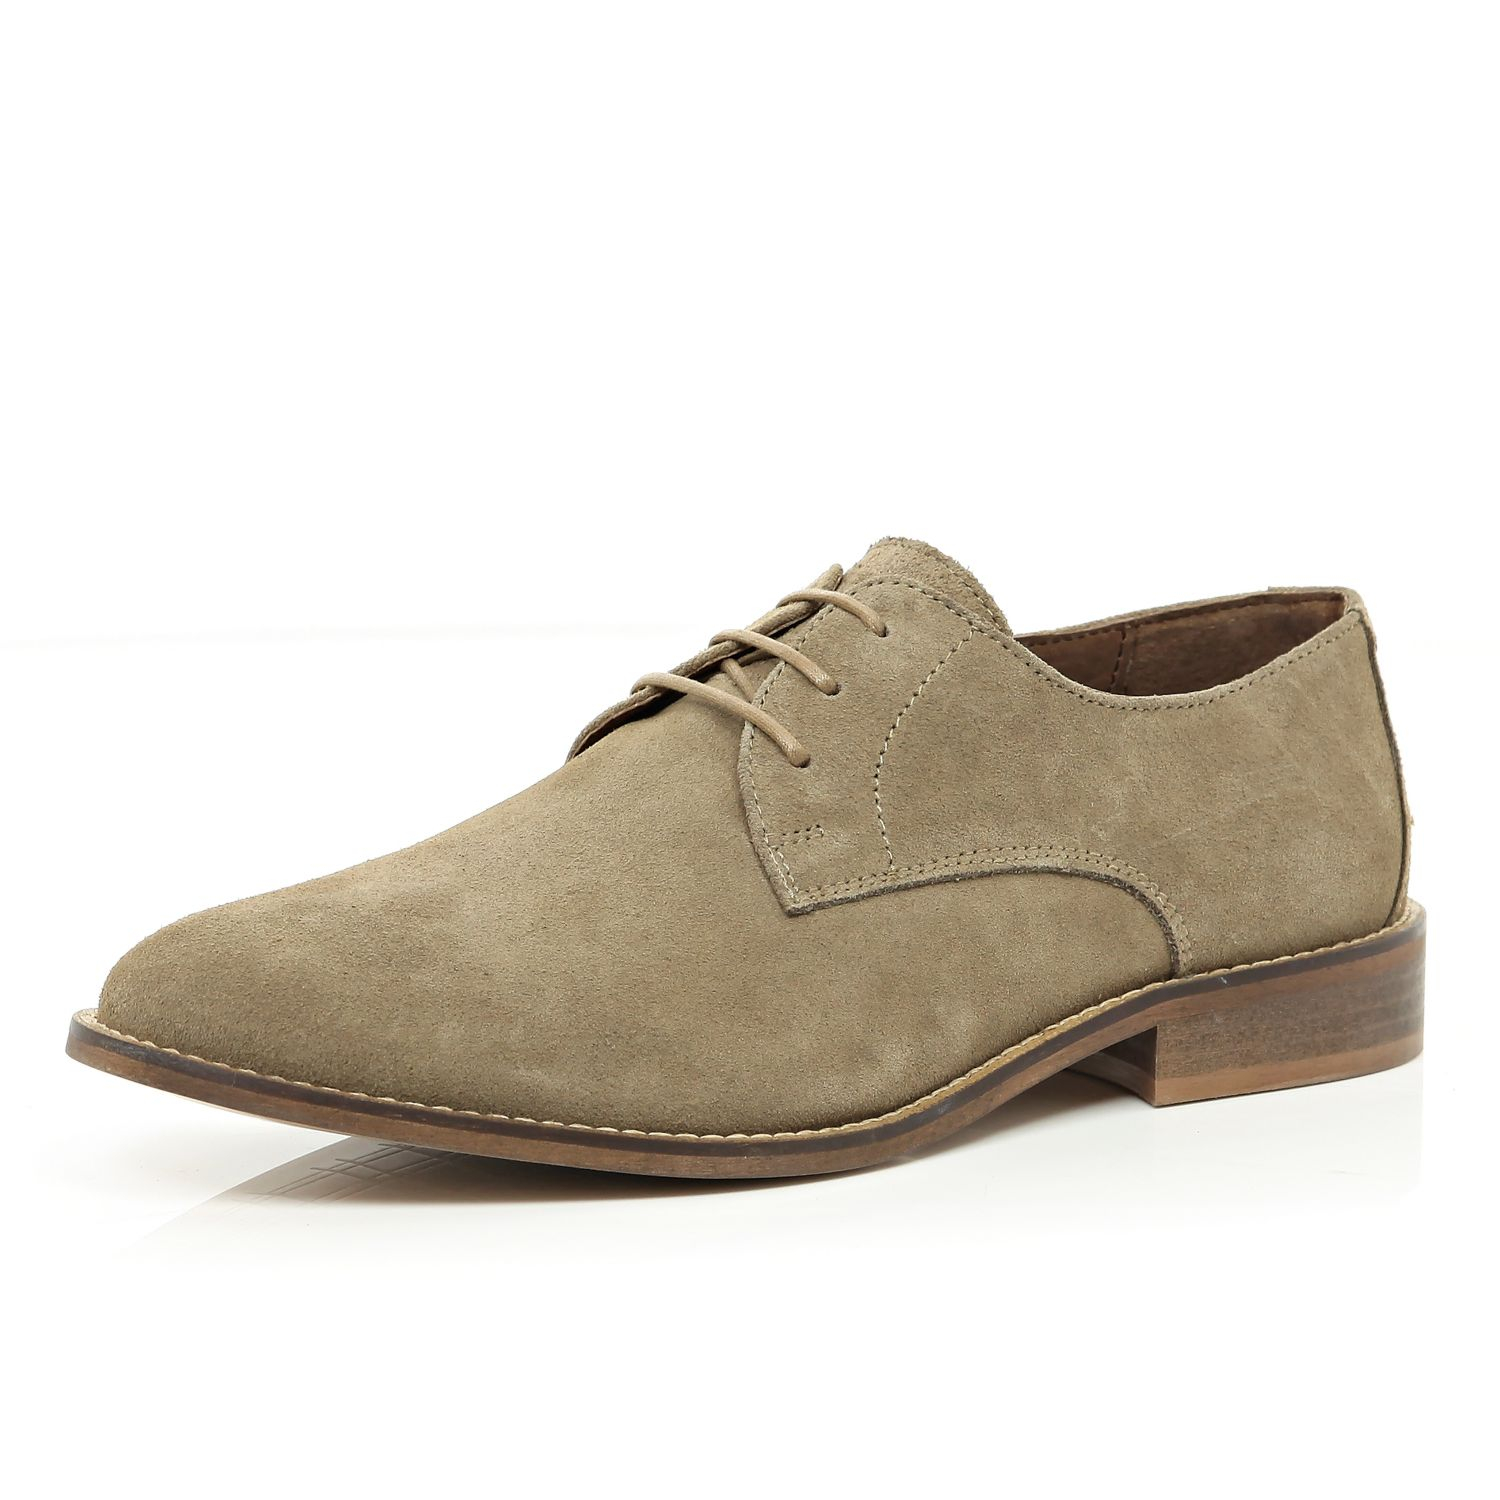 River Island Stone Suede Formal Shoes 